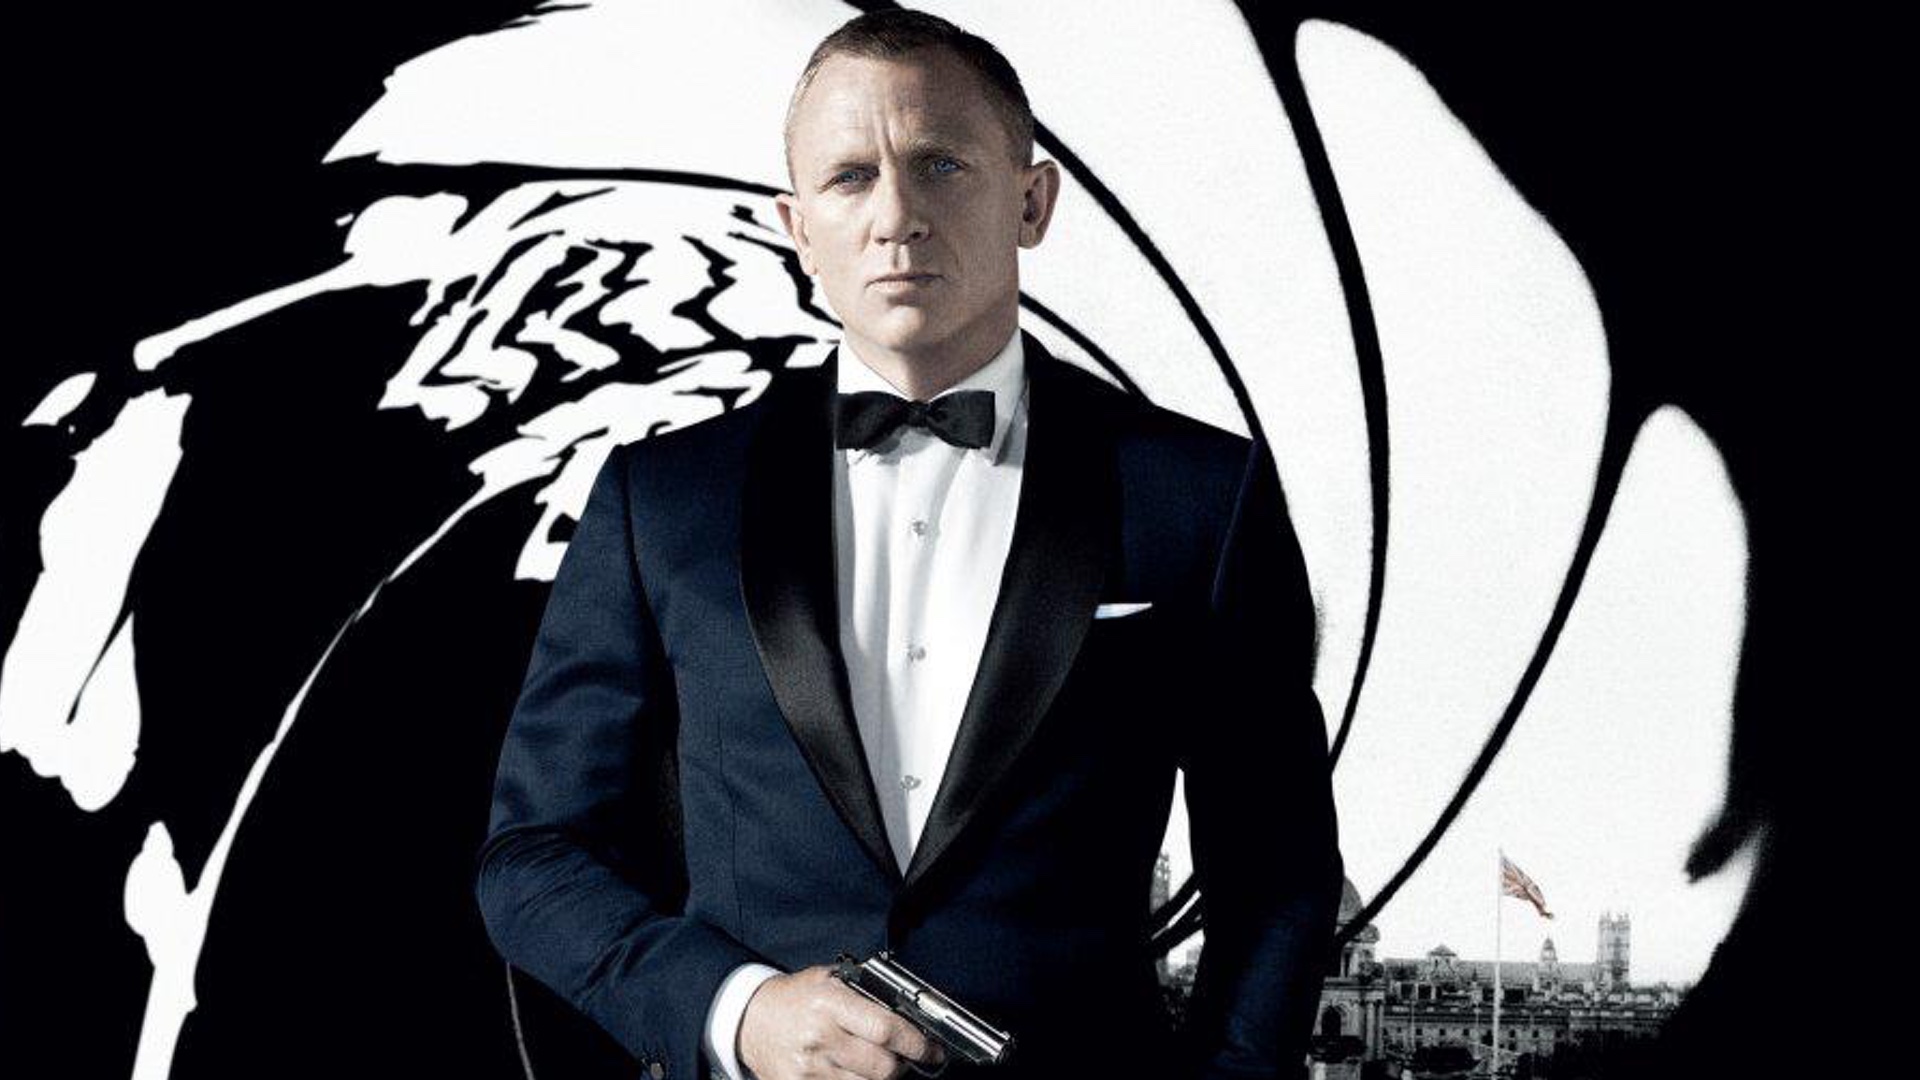 Danny Boyle Confirmed To Direct JAMES BOND 25 and Release Date ...